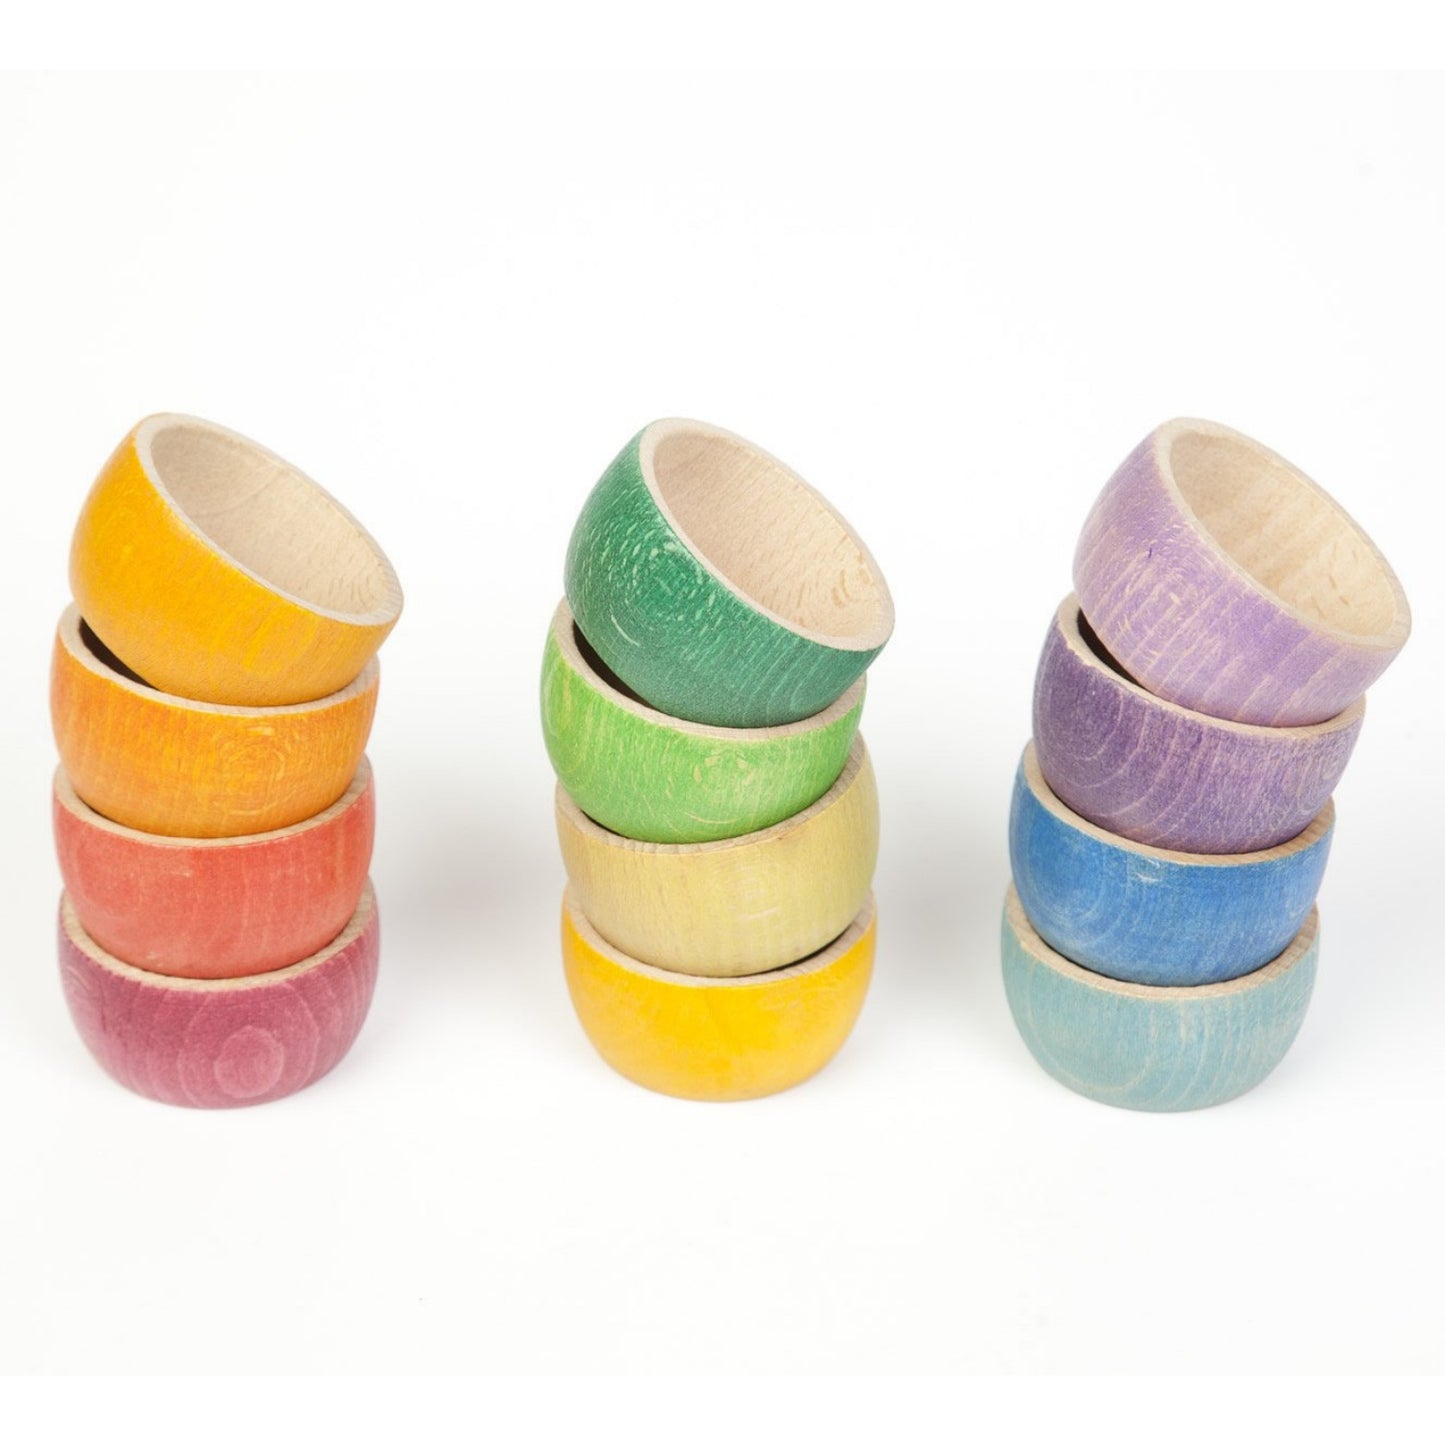 Grapat 12 Bowls | Wooden Toys for Kids | Open-Ended Play Set | Side View Stacked Bowls | BeoVERDE.ie